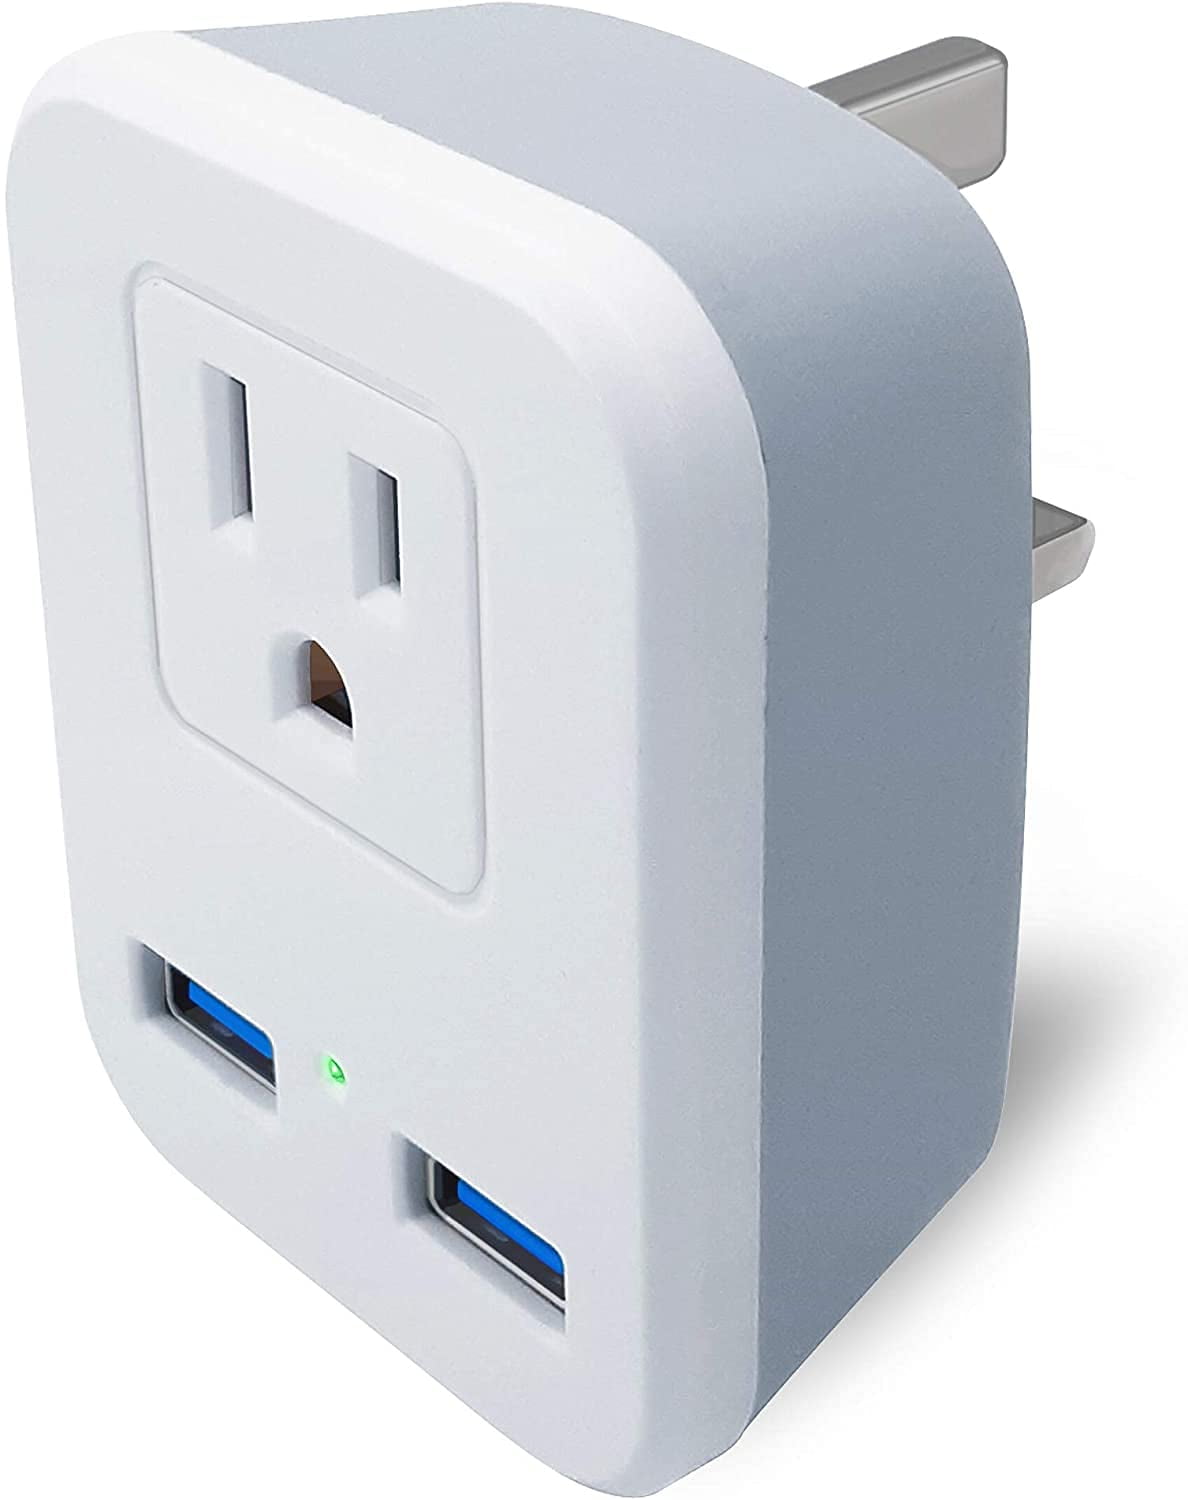 UK Power Adapter Plug Converter, AC Outlet USB Port Universal Wall Charger (Type G) for US to British Dubai Malaysia and More [Safety - Walmart.com